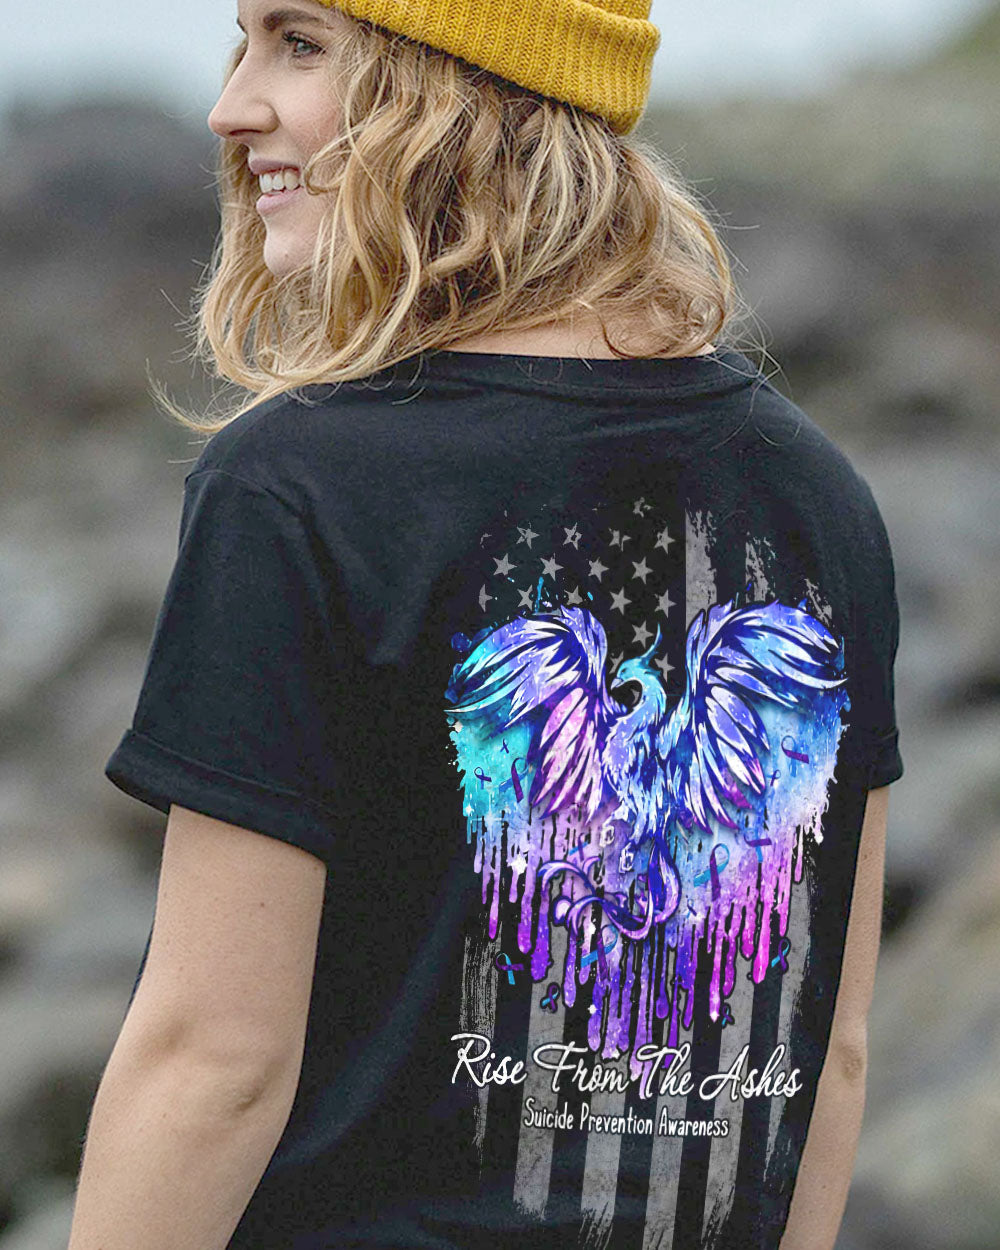 Rise From The Ashes Flag Women's Suicide Prevention Awareness Tshirt